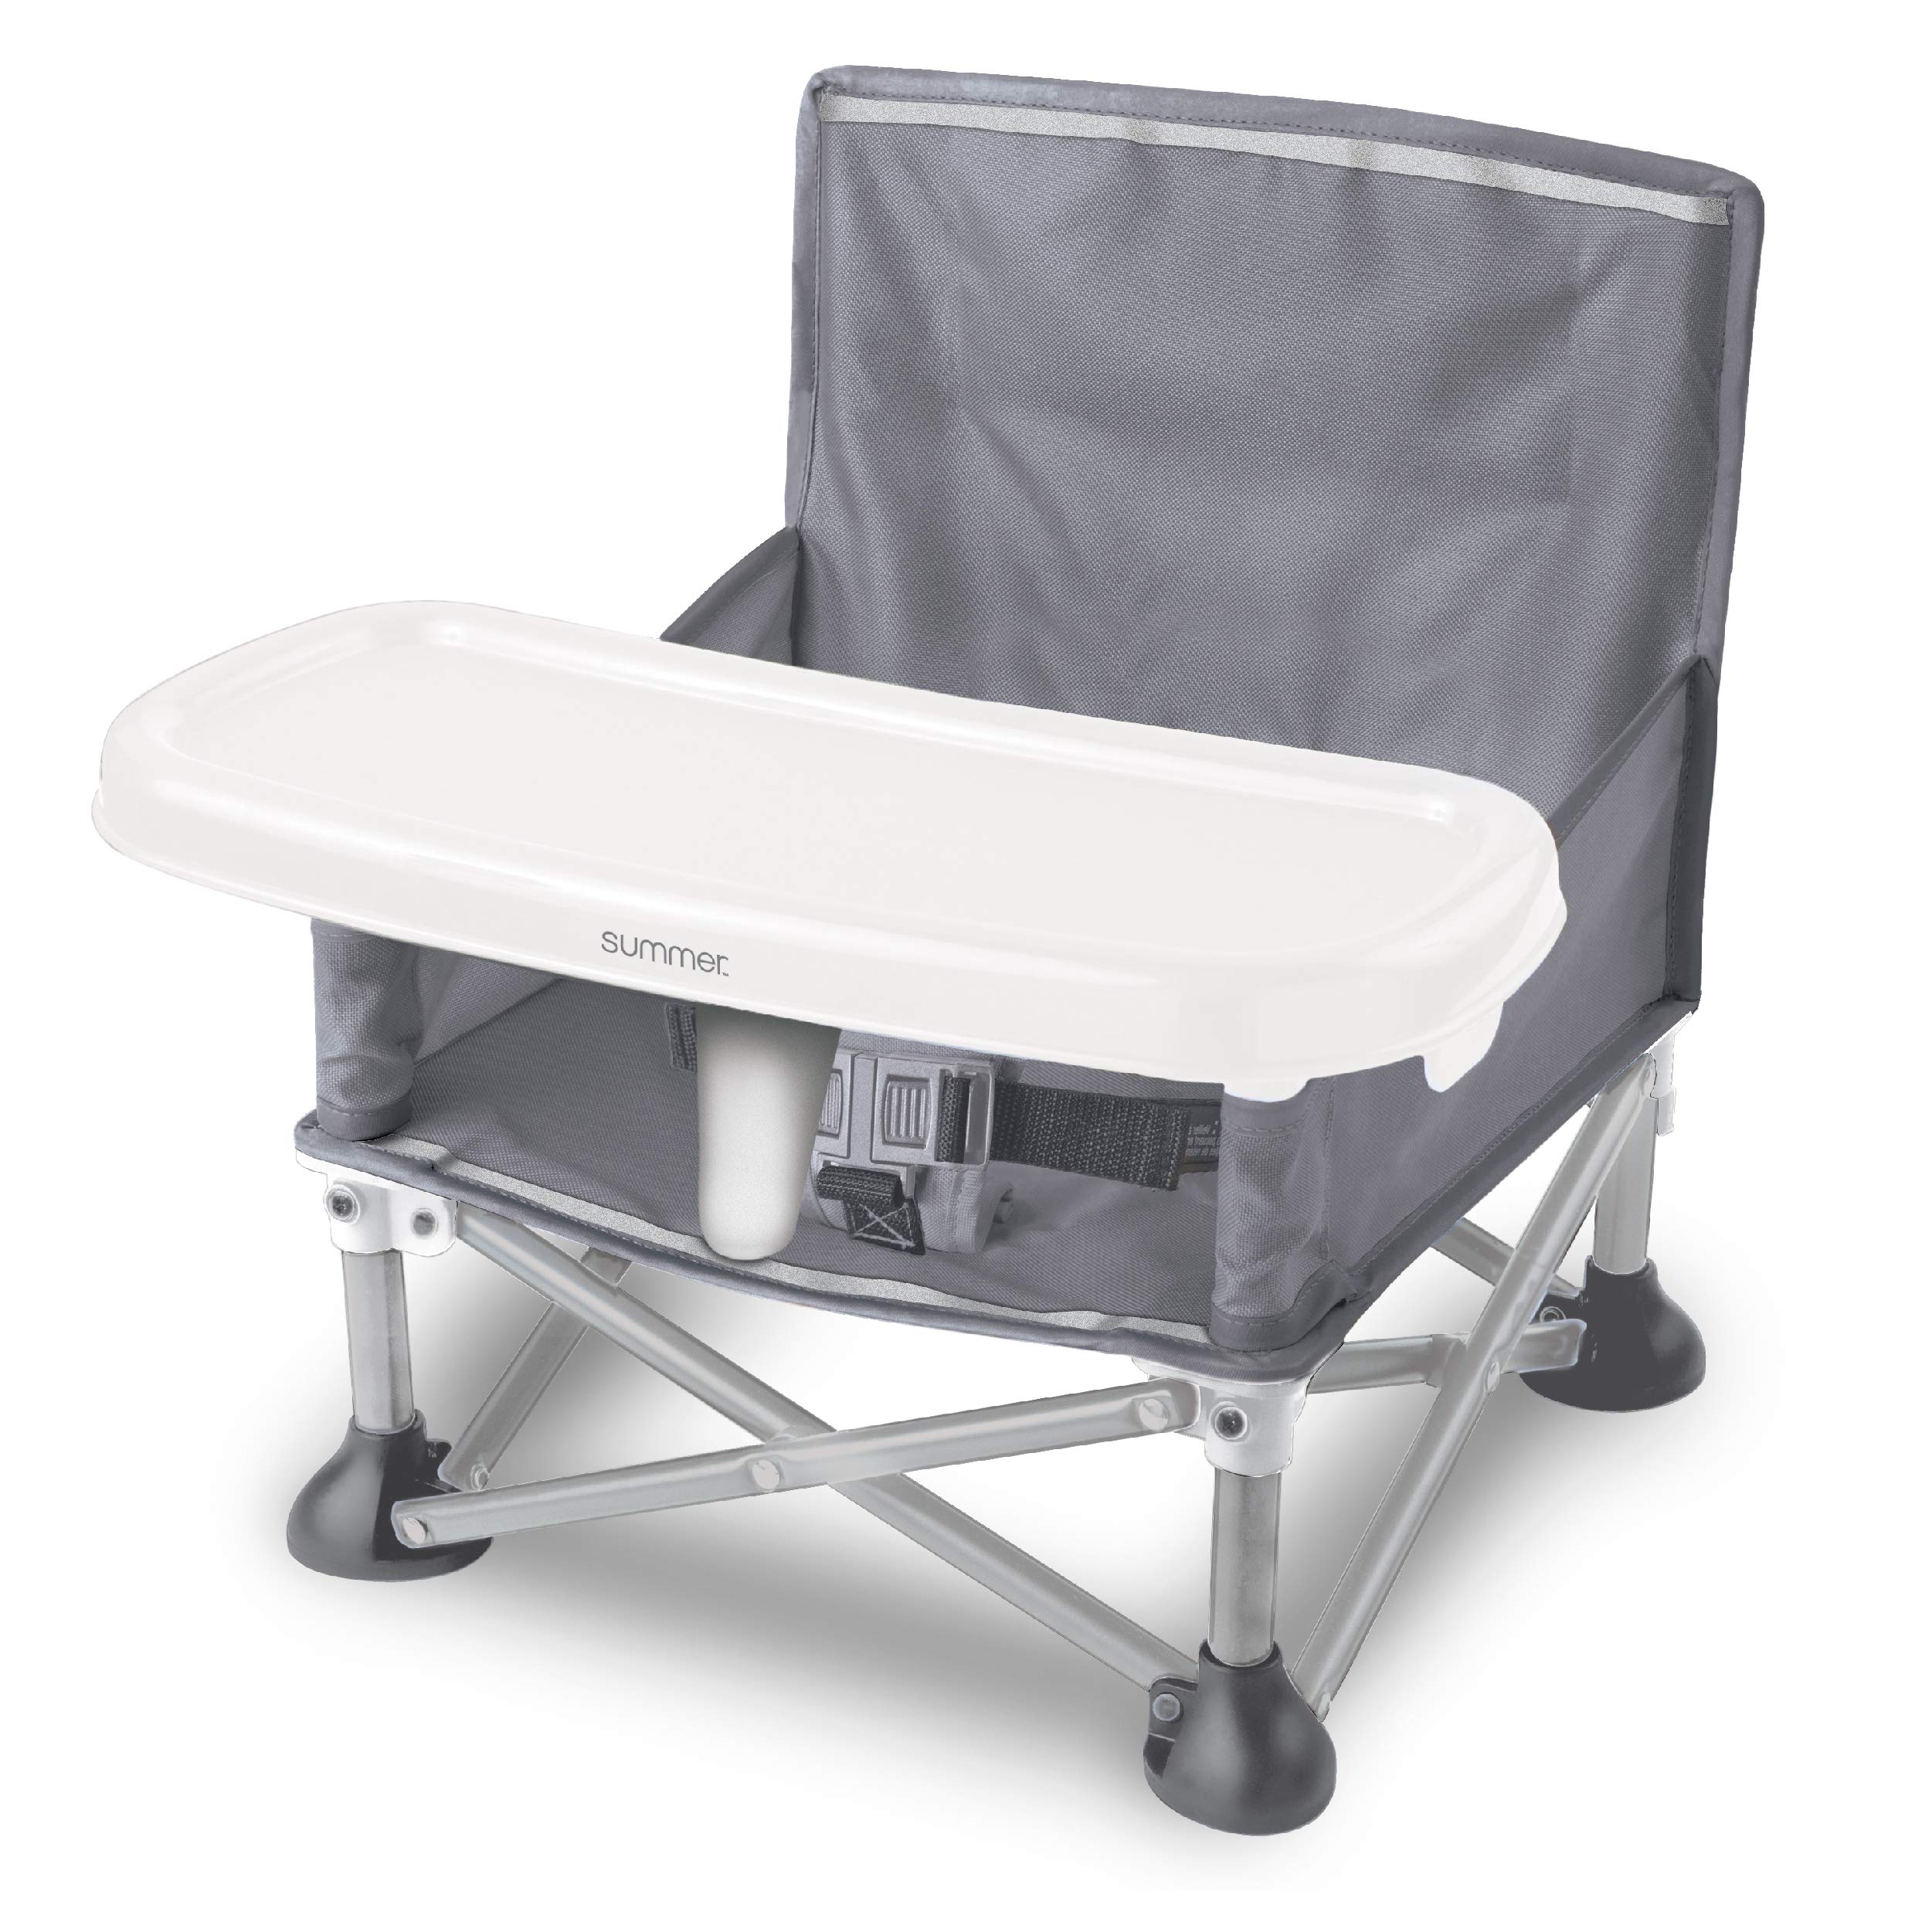 Summer Pop ‘N Sit Portable Booster Chair, Gray - Booster Seat for Indoor/Outdoor Use - Fast, Easy and Compact Fold